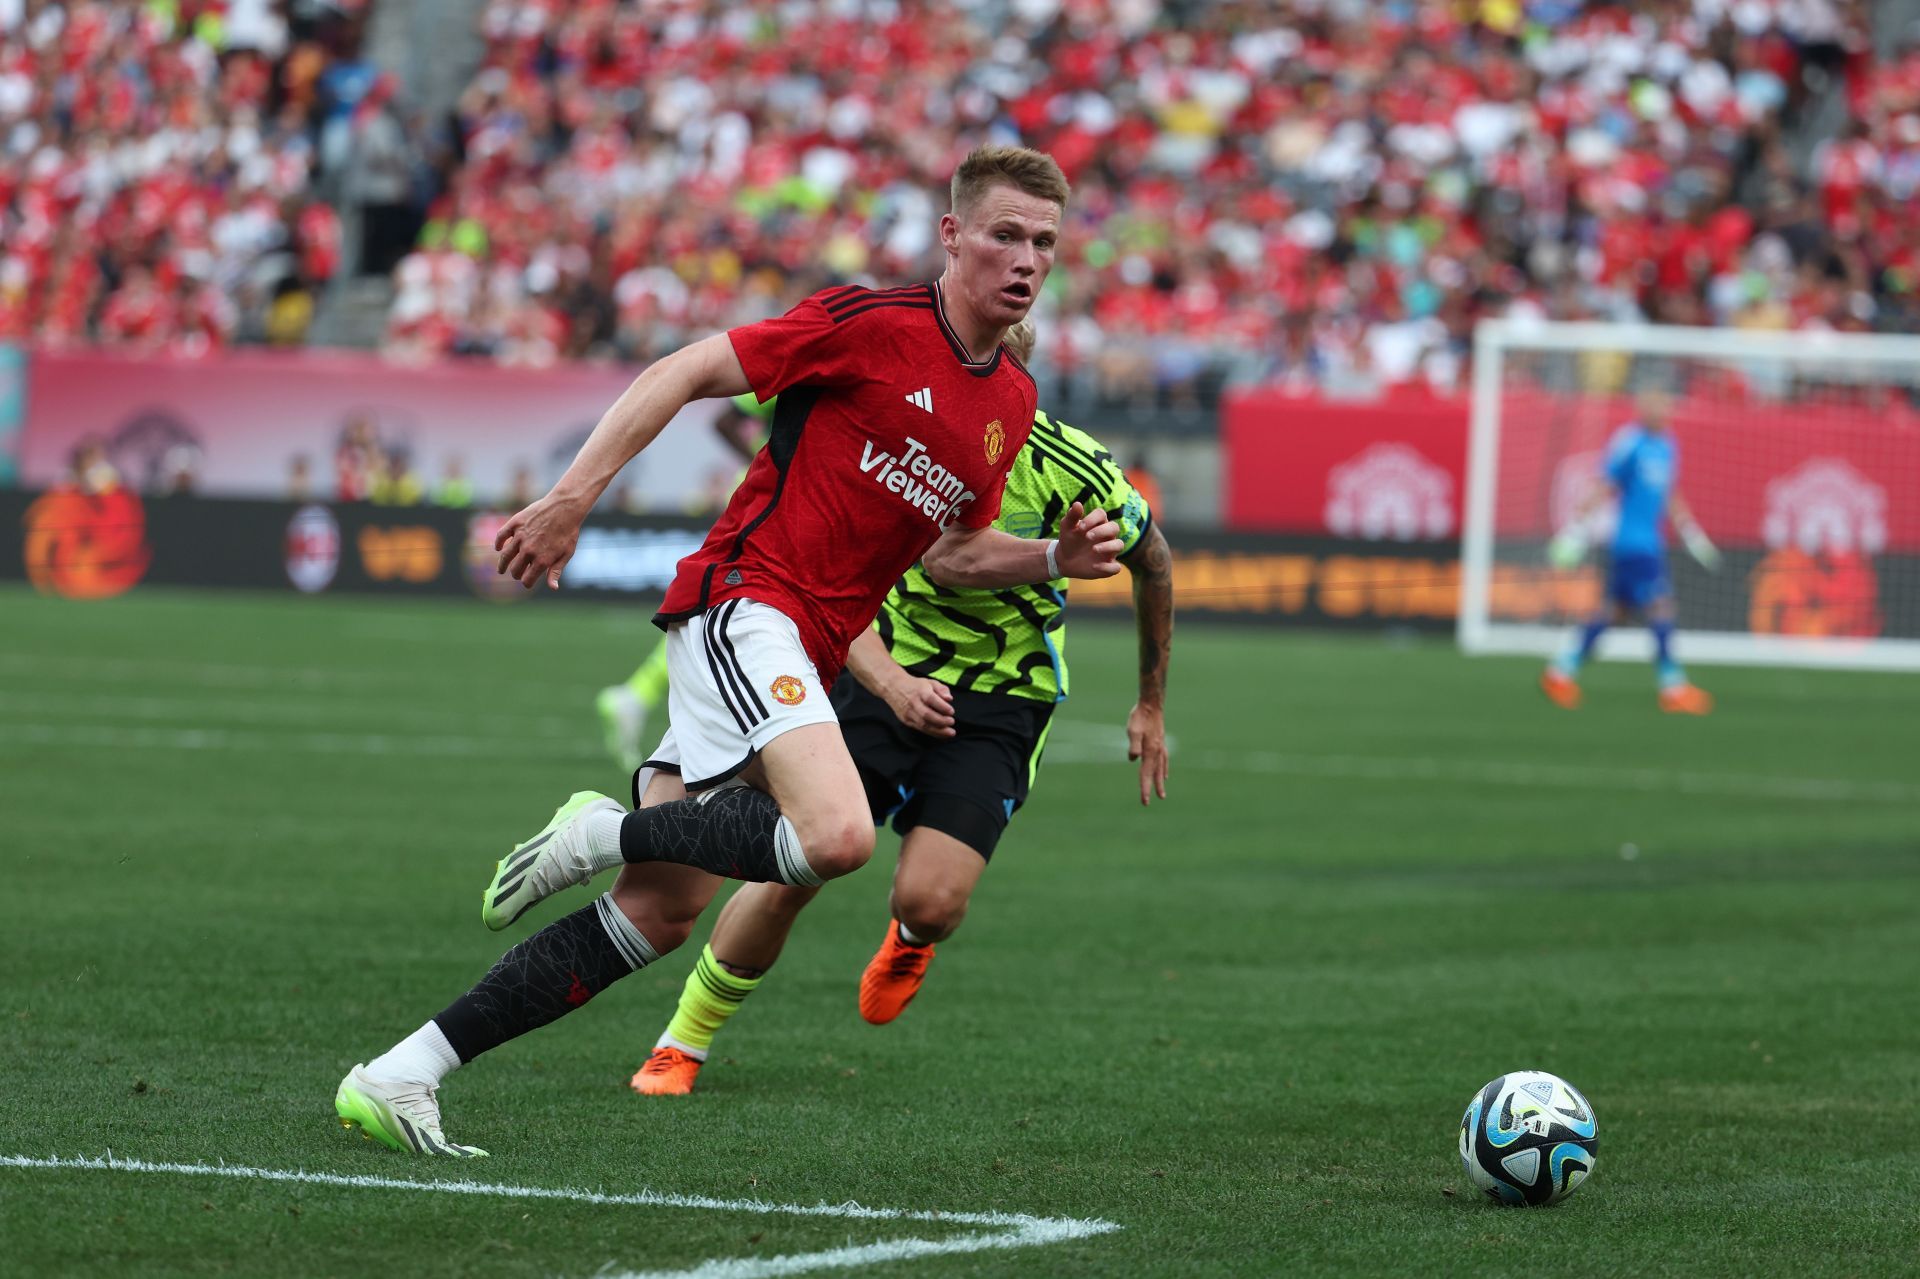 McTominay has emerged as one of the candidates to leave United this summer.